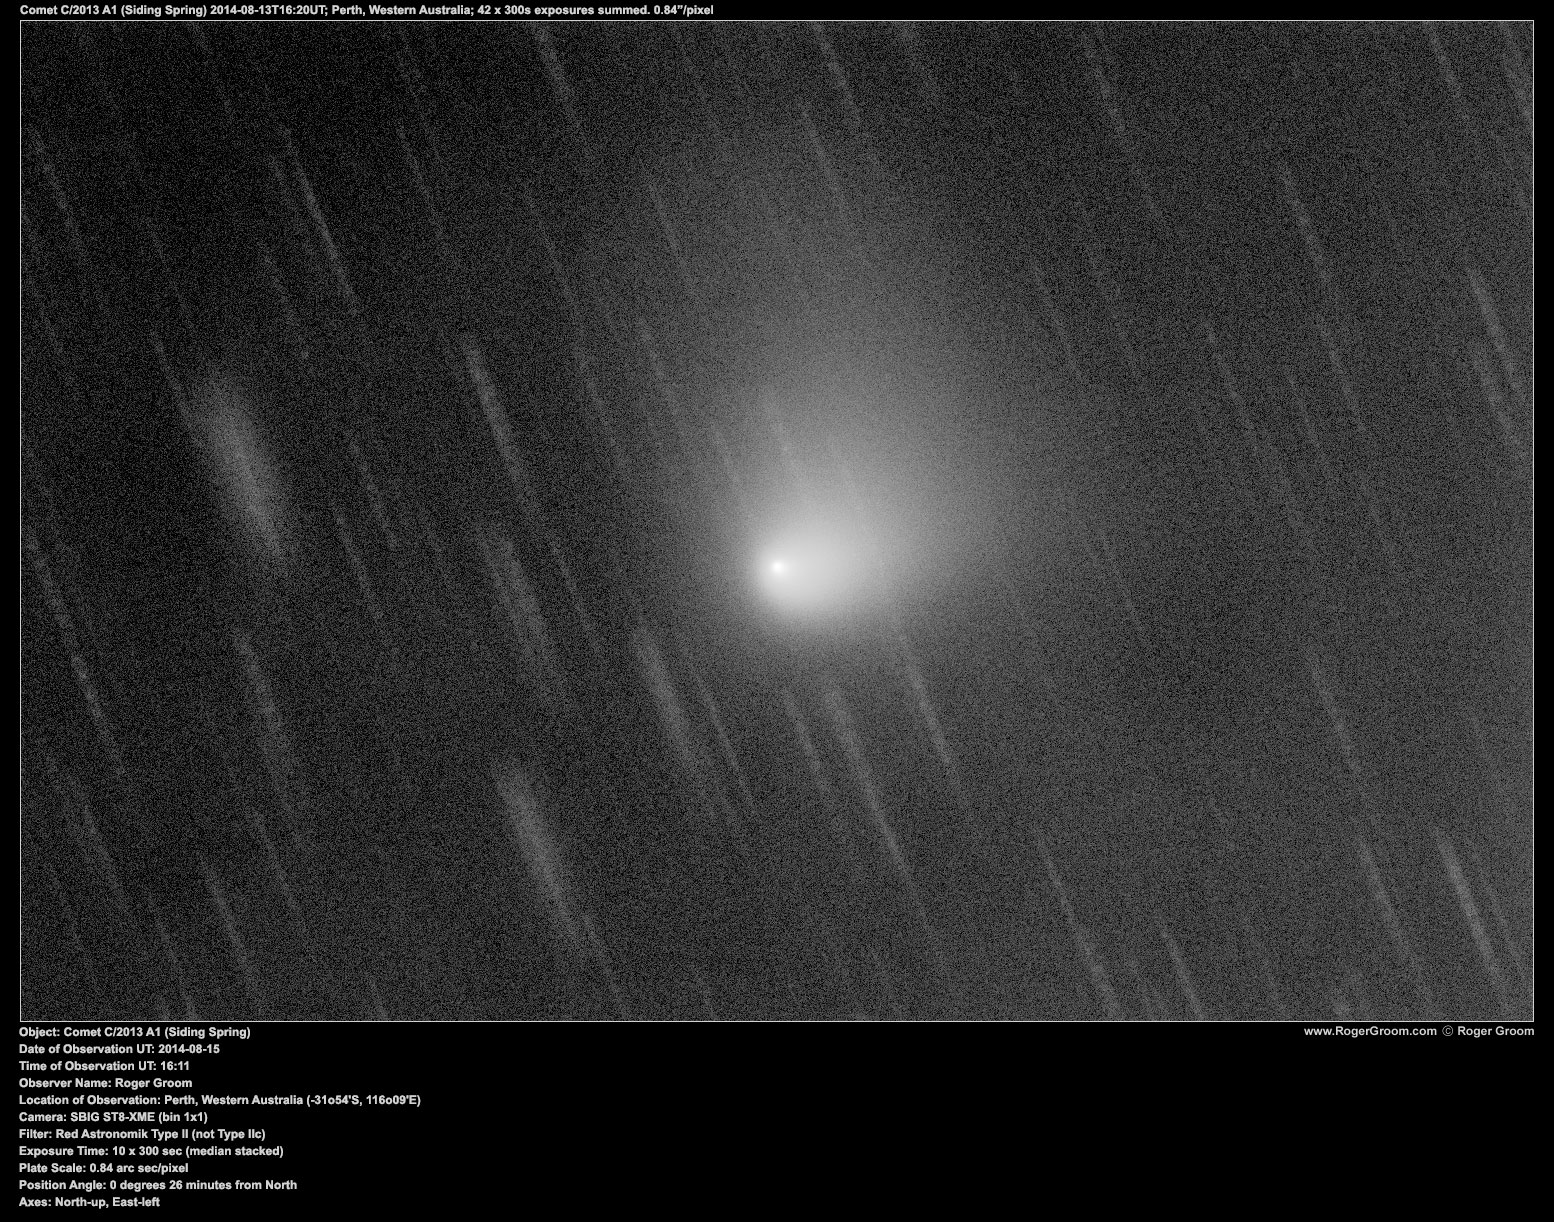 Object: Comet C/2013 A1 (Siding Spring) Date of Observation UT: 2014-08-15 Time of Observation UT: 16:11 Observer Name: Roger Groom Location of Observation: Perth, Western Australia (-31o54'S, 116o09'E) Camera: SBIG ST8-XME (bin 1x1) Filter: Red Astronomik Type II (not Type IIc) Exposure Time: 10 x 300 sec (median stacked) Plate Scale: 0.84 arc sec/pixel Position Angle: 0 degrees 26 minutes from North Axes: North-up, East-left This is a median stack which has had gradient removal applied via DBE in PixInsight. As such there is  chance the outer reaches of the comet have been affected by gradient removal.